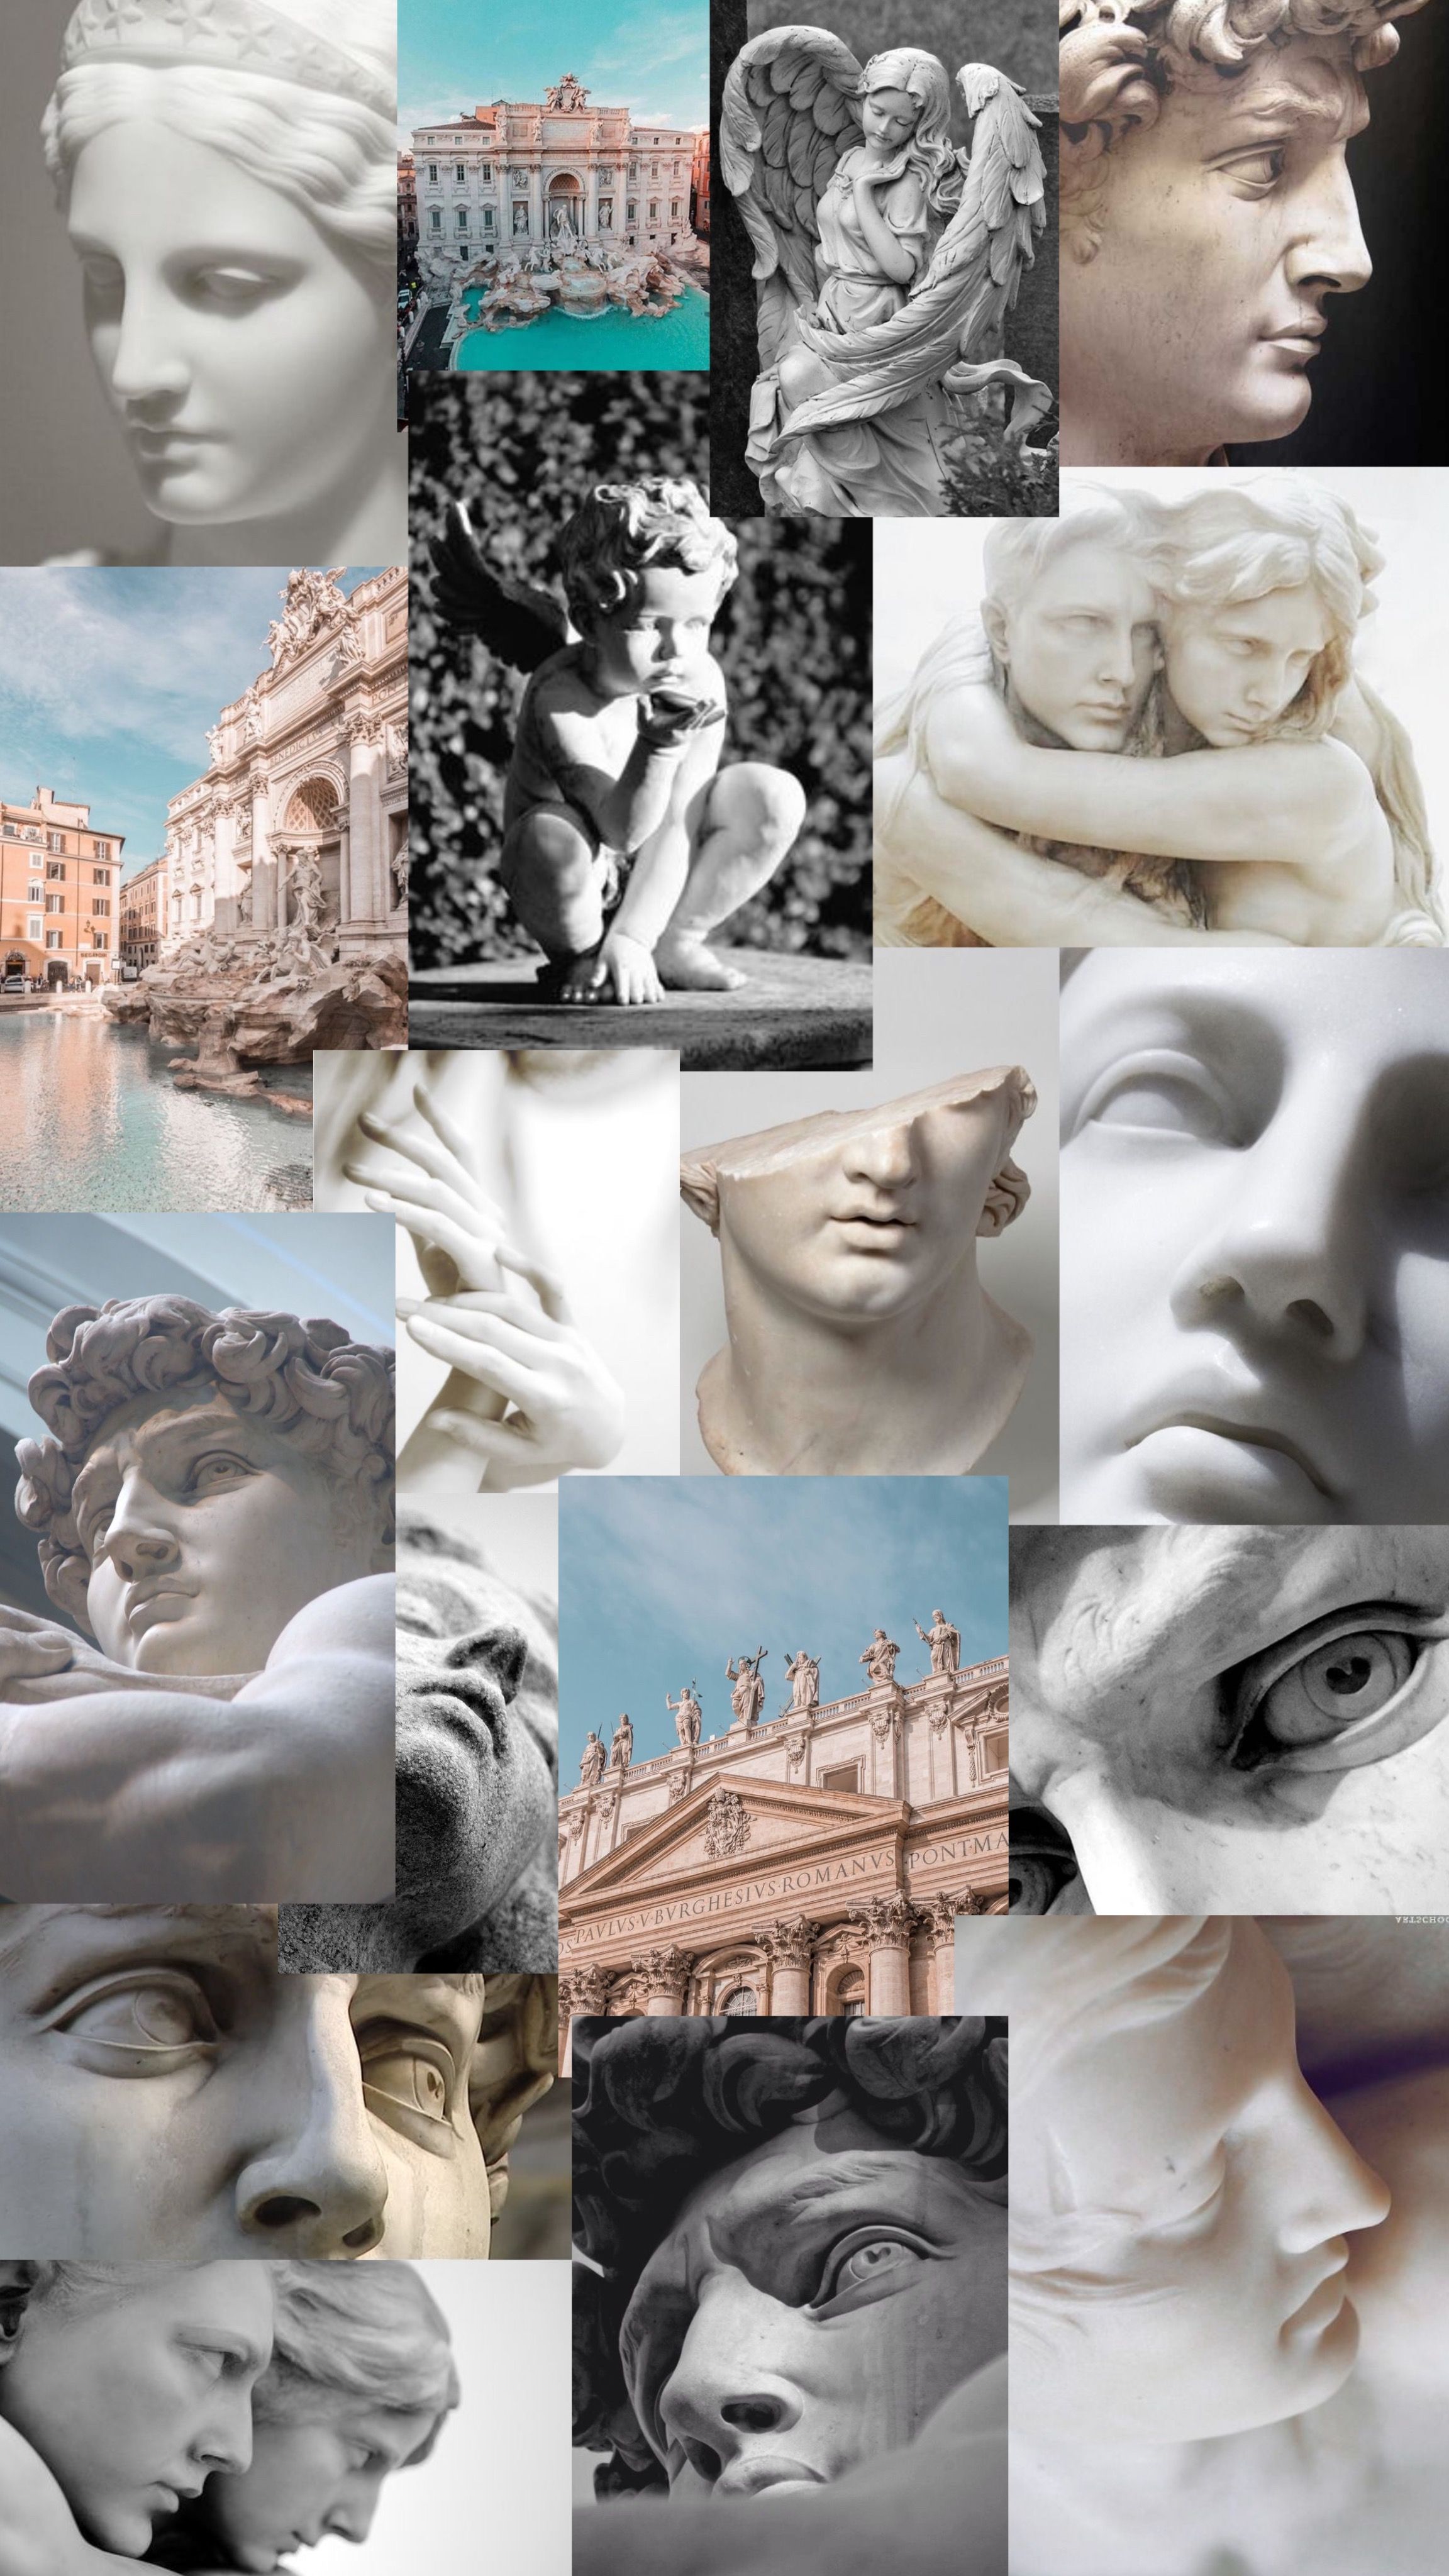 Aesthetic collage of marble statues, including the statue of David by Michelangelo. - Greek statue, Greek mythology, statue